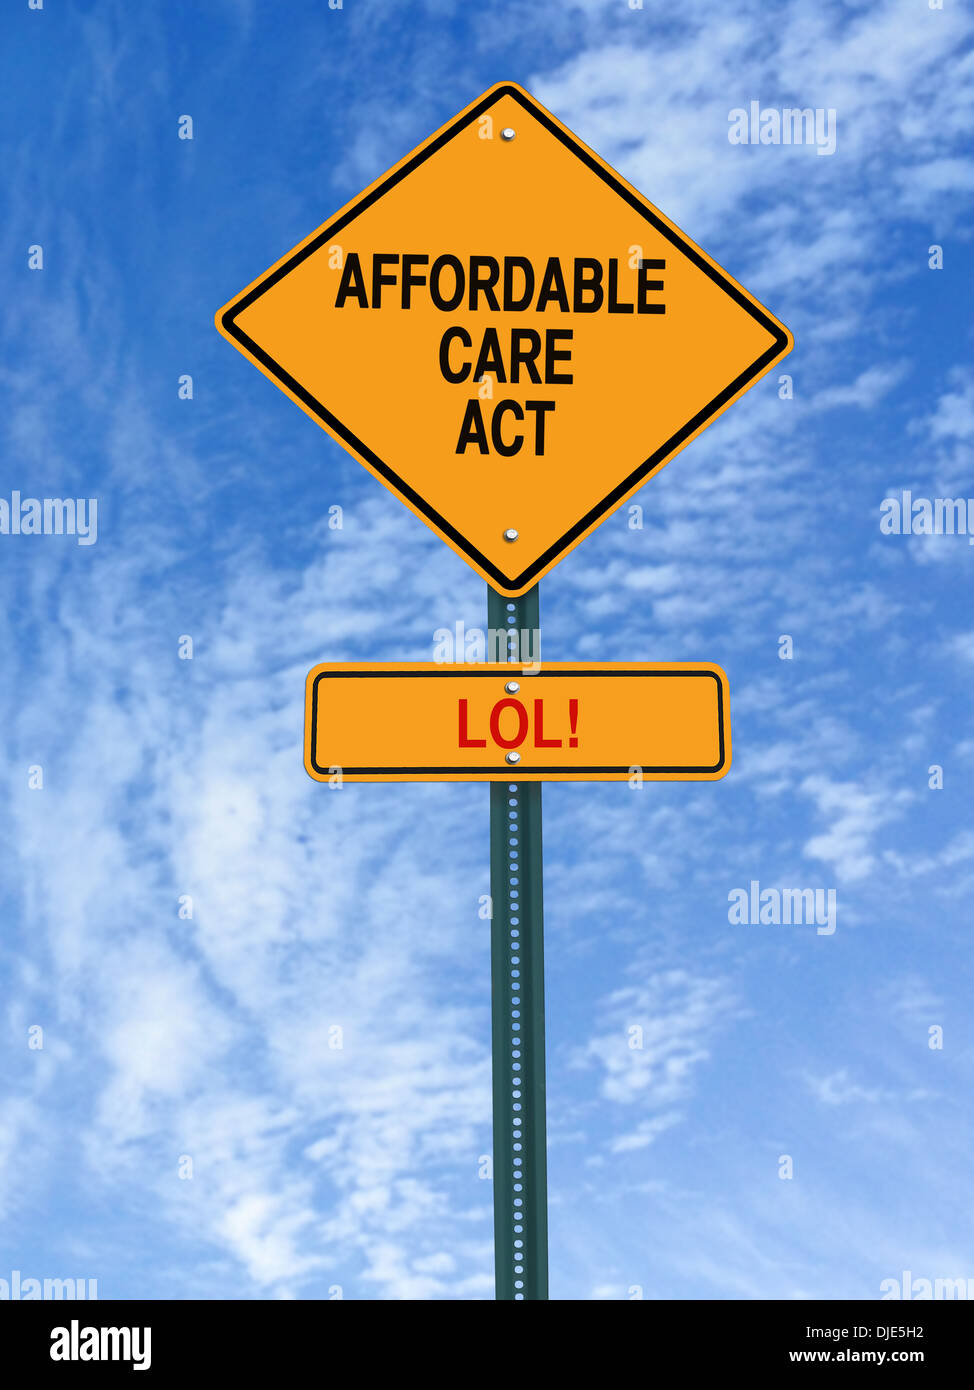 conceptual sign with words affordable care act lol over blue sky Stock Photo